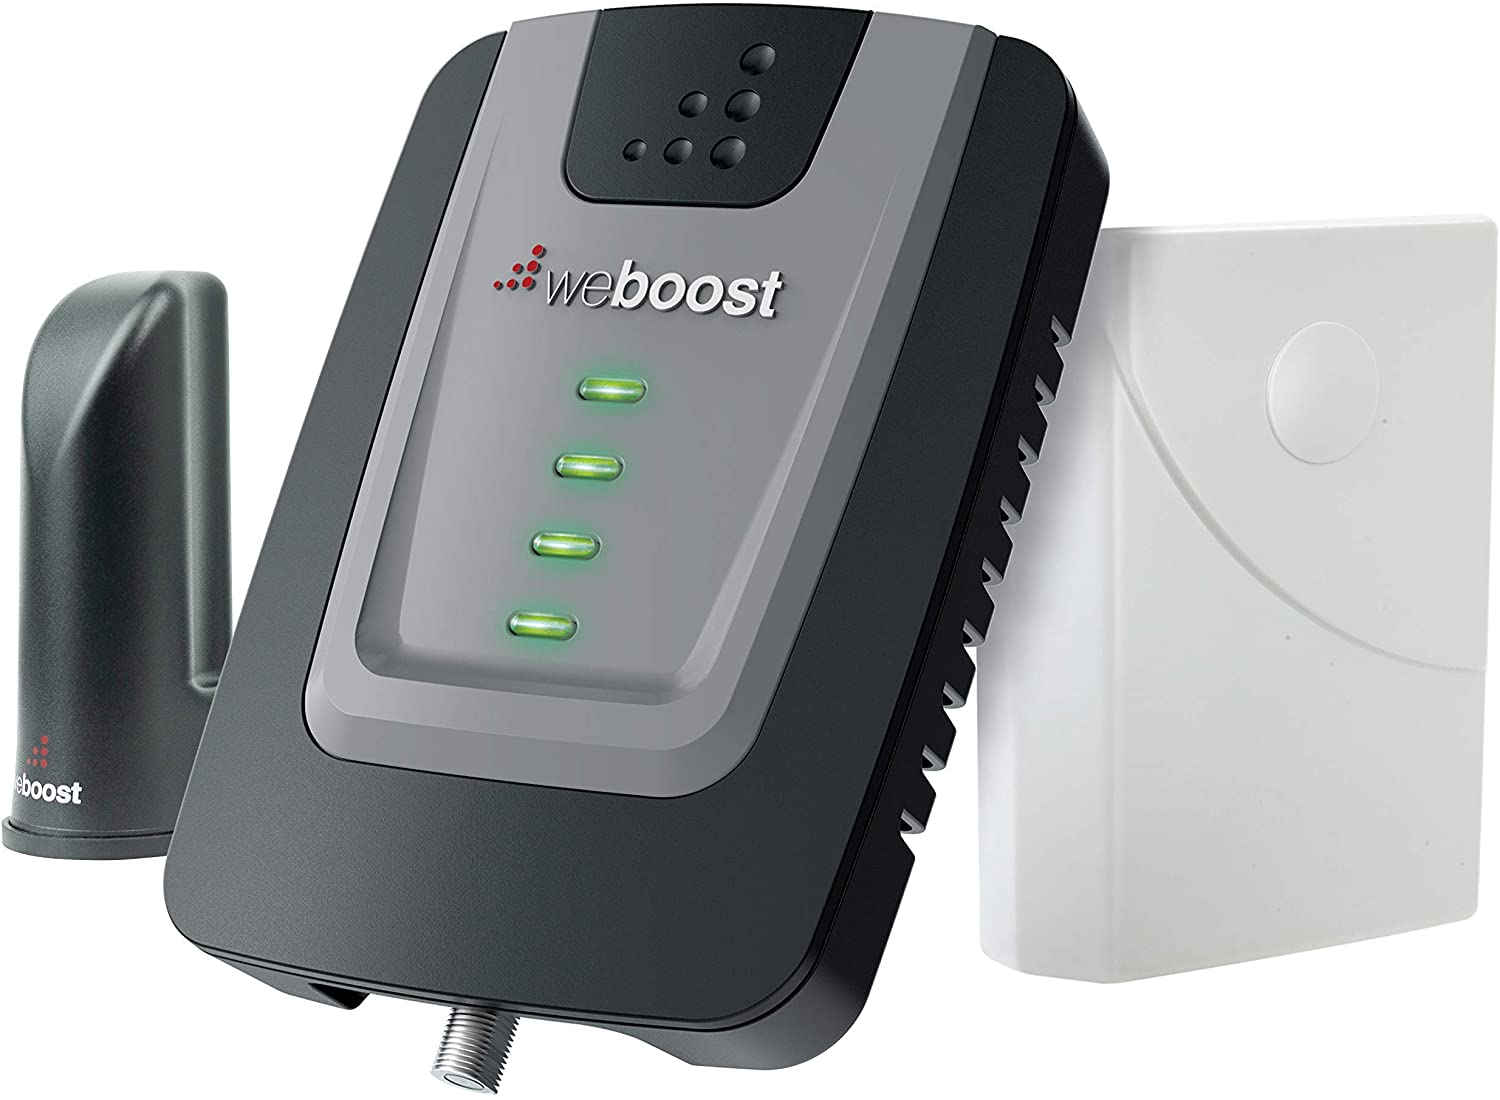 WeBoost Home Room model cellular signal booster - great for RV and camping use.